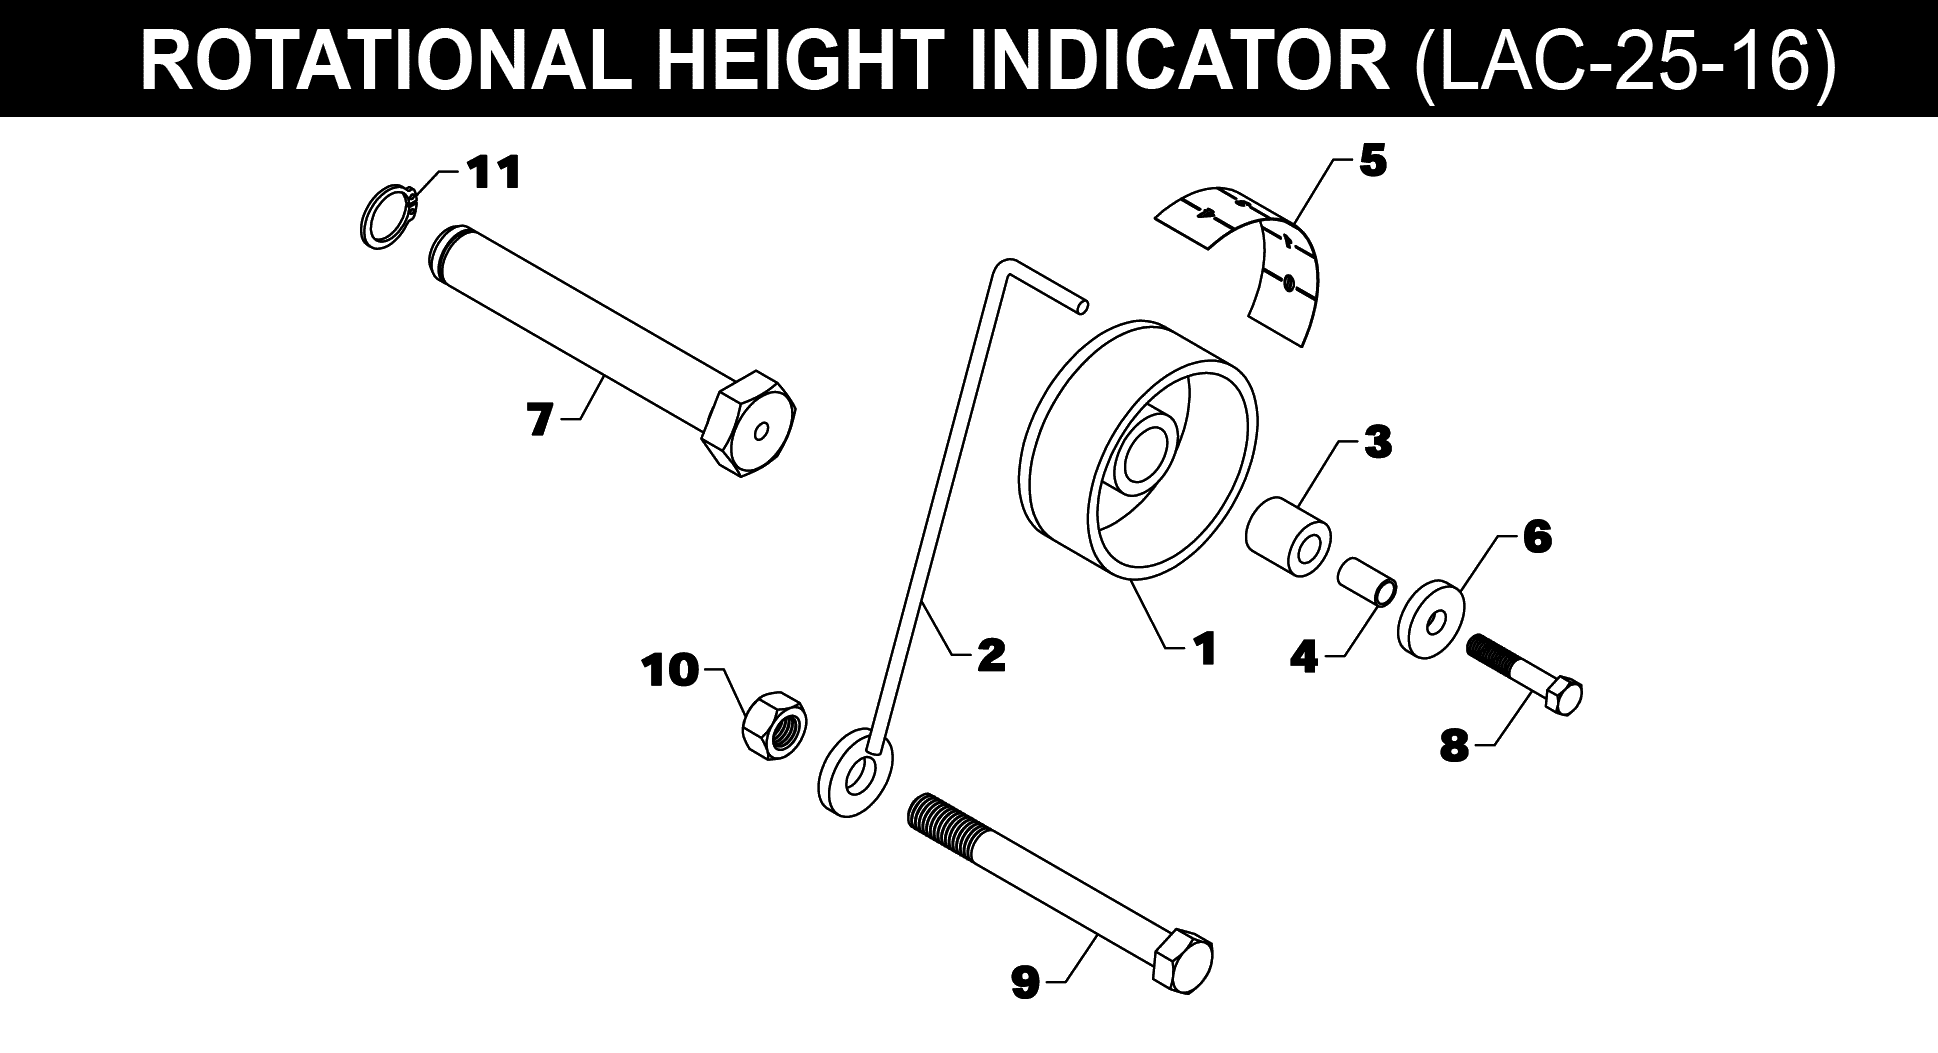 Height Indicator - LAC-25-16